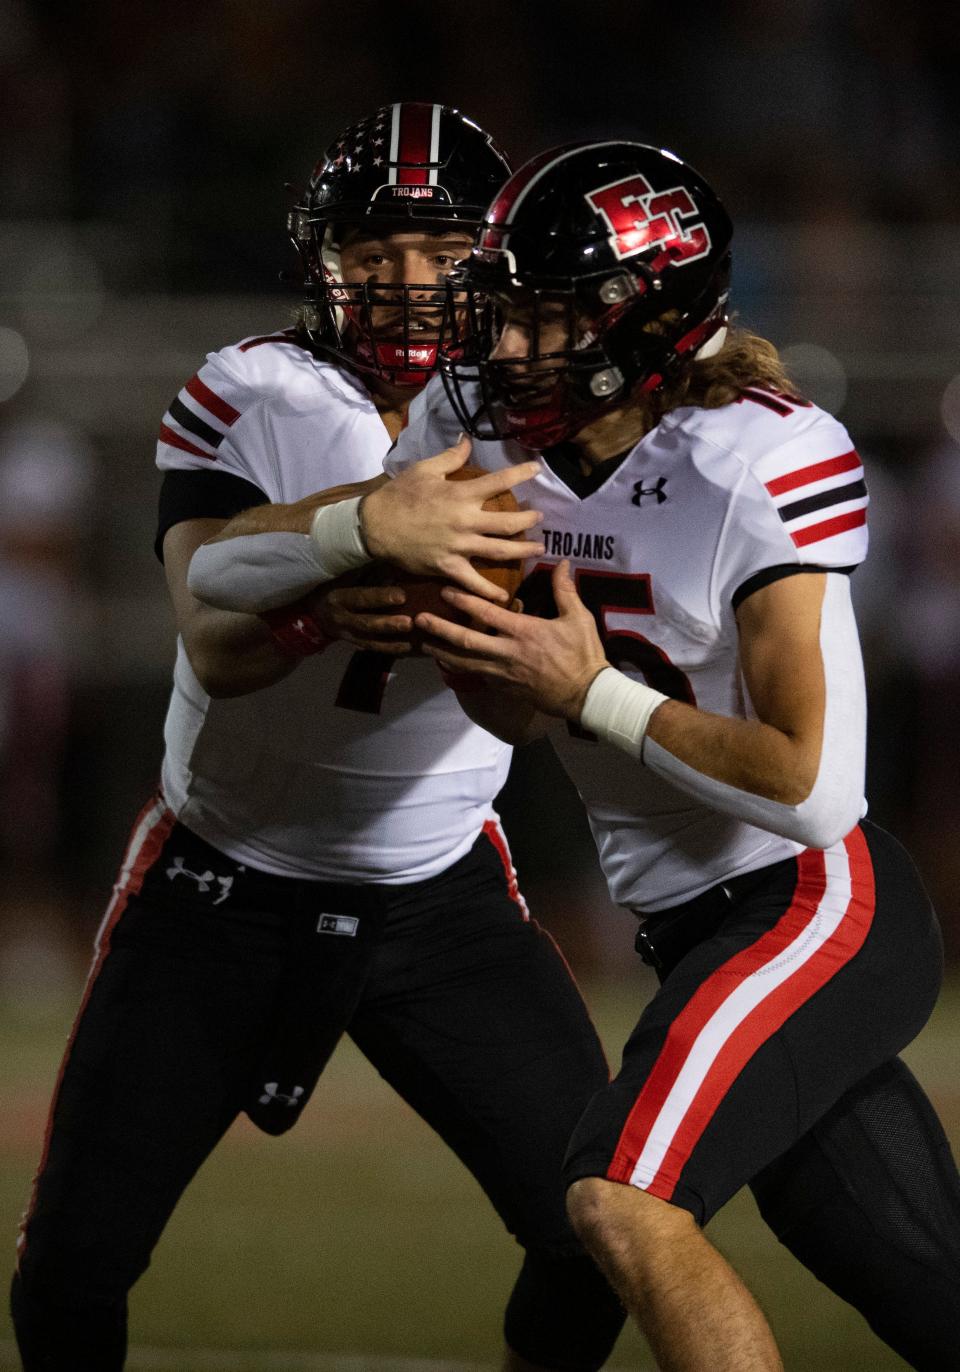 East Central’s Cole Burton (7) hands off to East Central’s Josh Ringer (15) as the East Central Trojans play the Memorial Tigers during the 2023 IHSAA 4A Regional at Enlow Field in Evansville, Ind., Friday, Nov. 10, 2023.